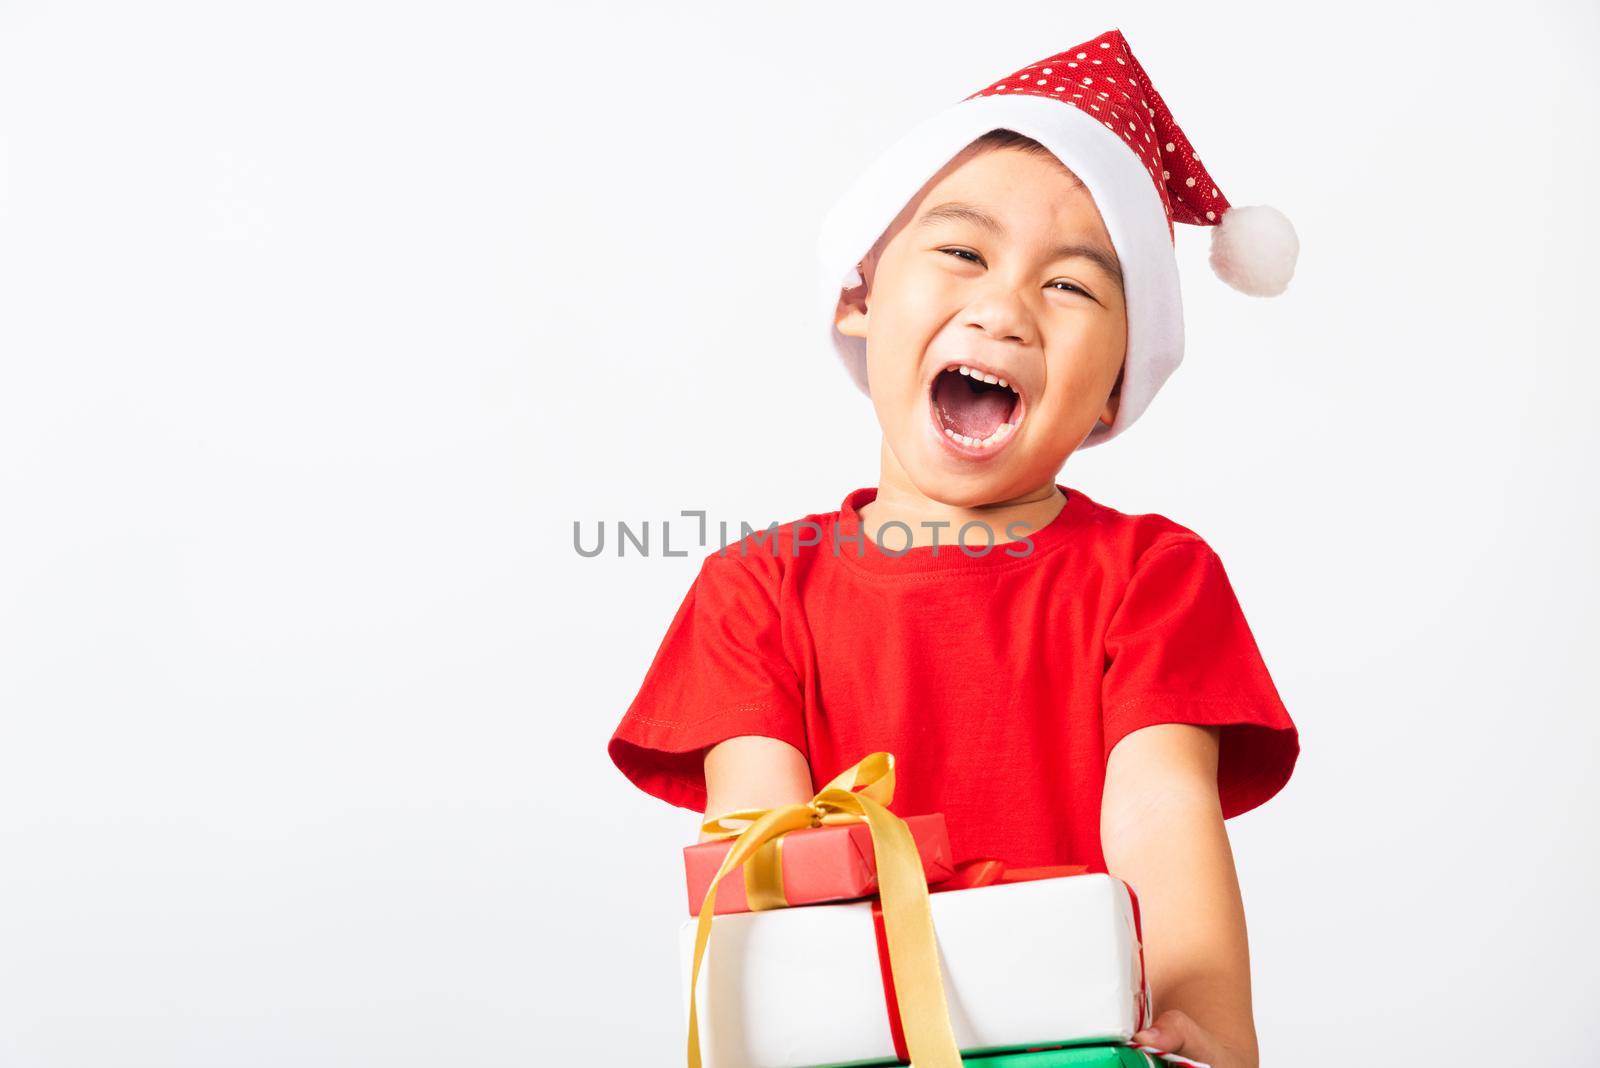 Asian little child cute boy smile and excited, Kid dressed in red Santa Claus hat hold gift box on hands concept of holiday Christmas Xmas day or Happy new year isolated on white background